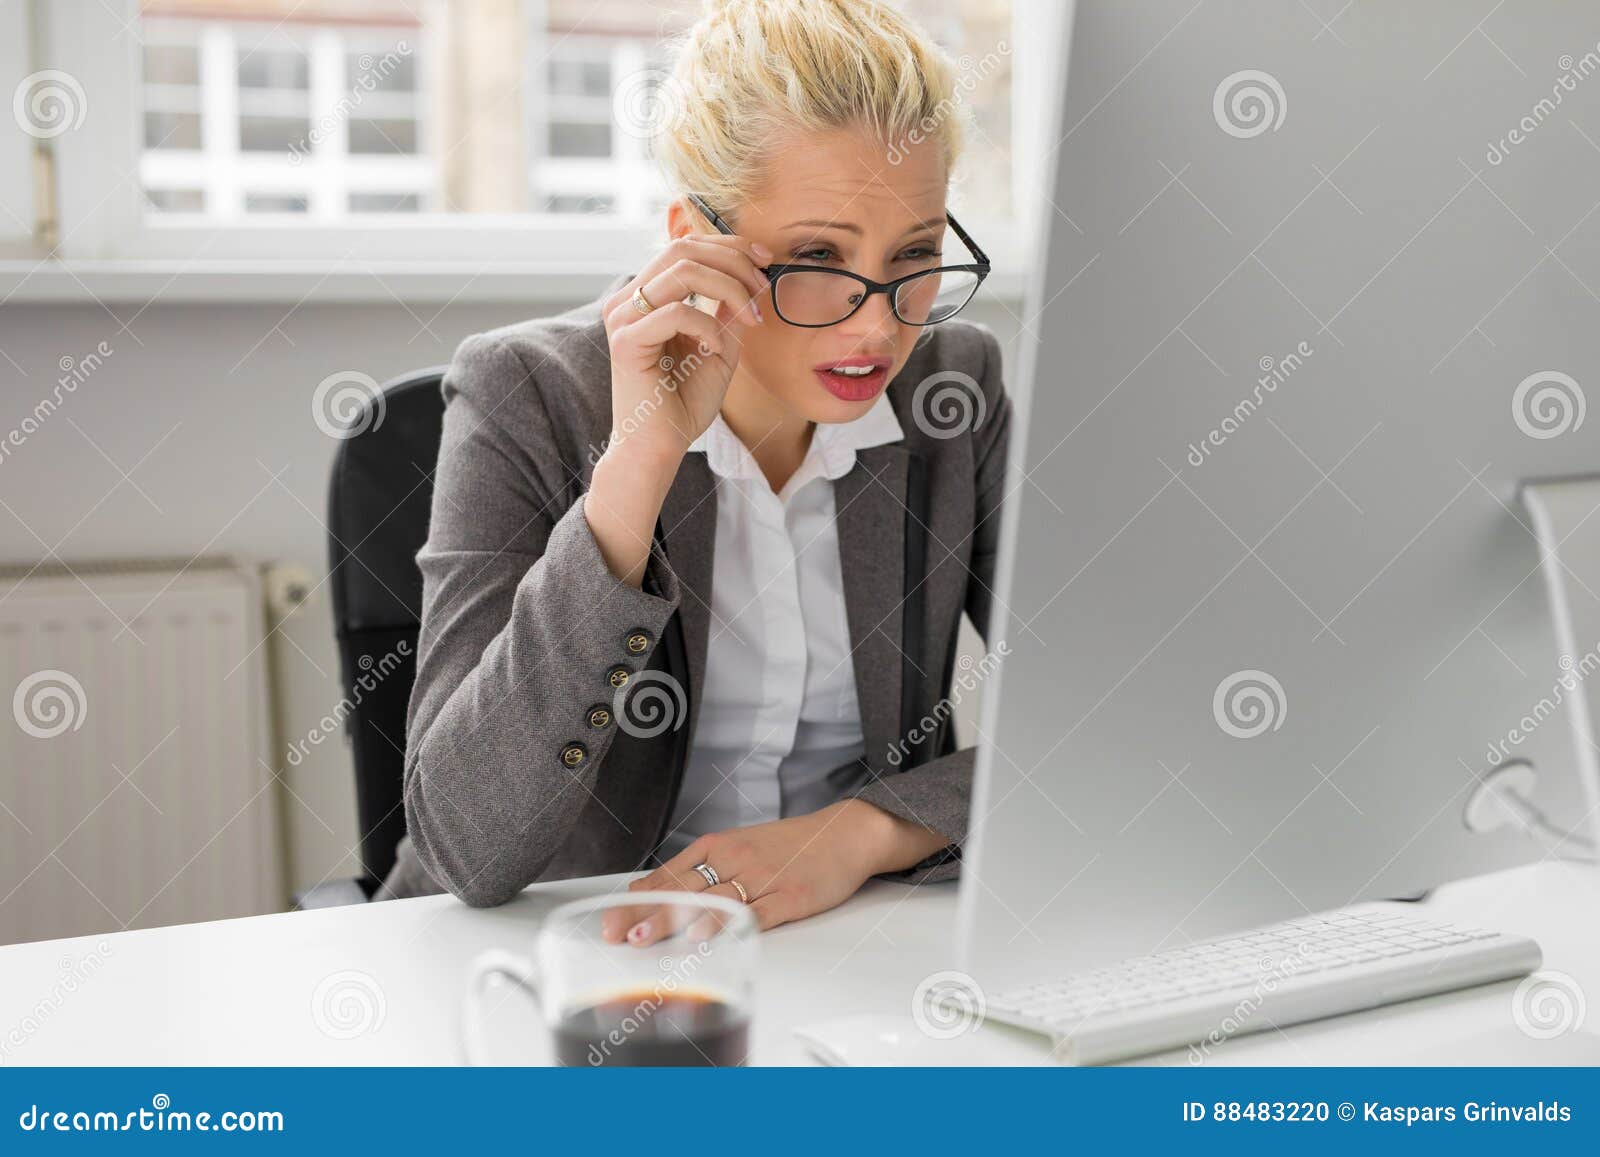 woman squeezing her eyes to see whats on computer